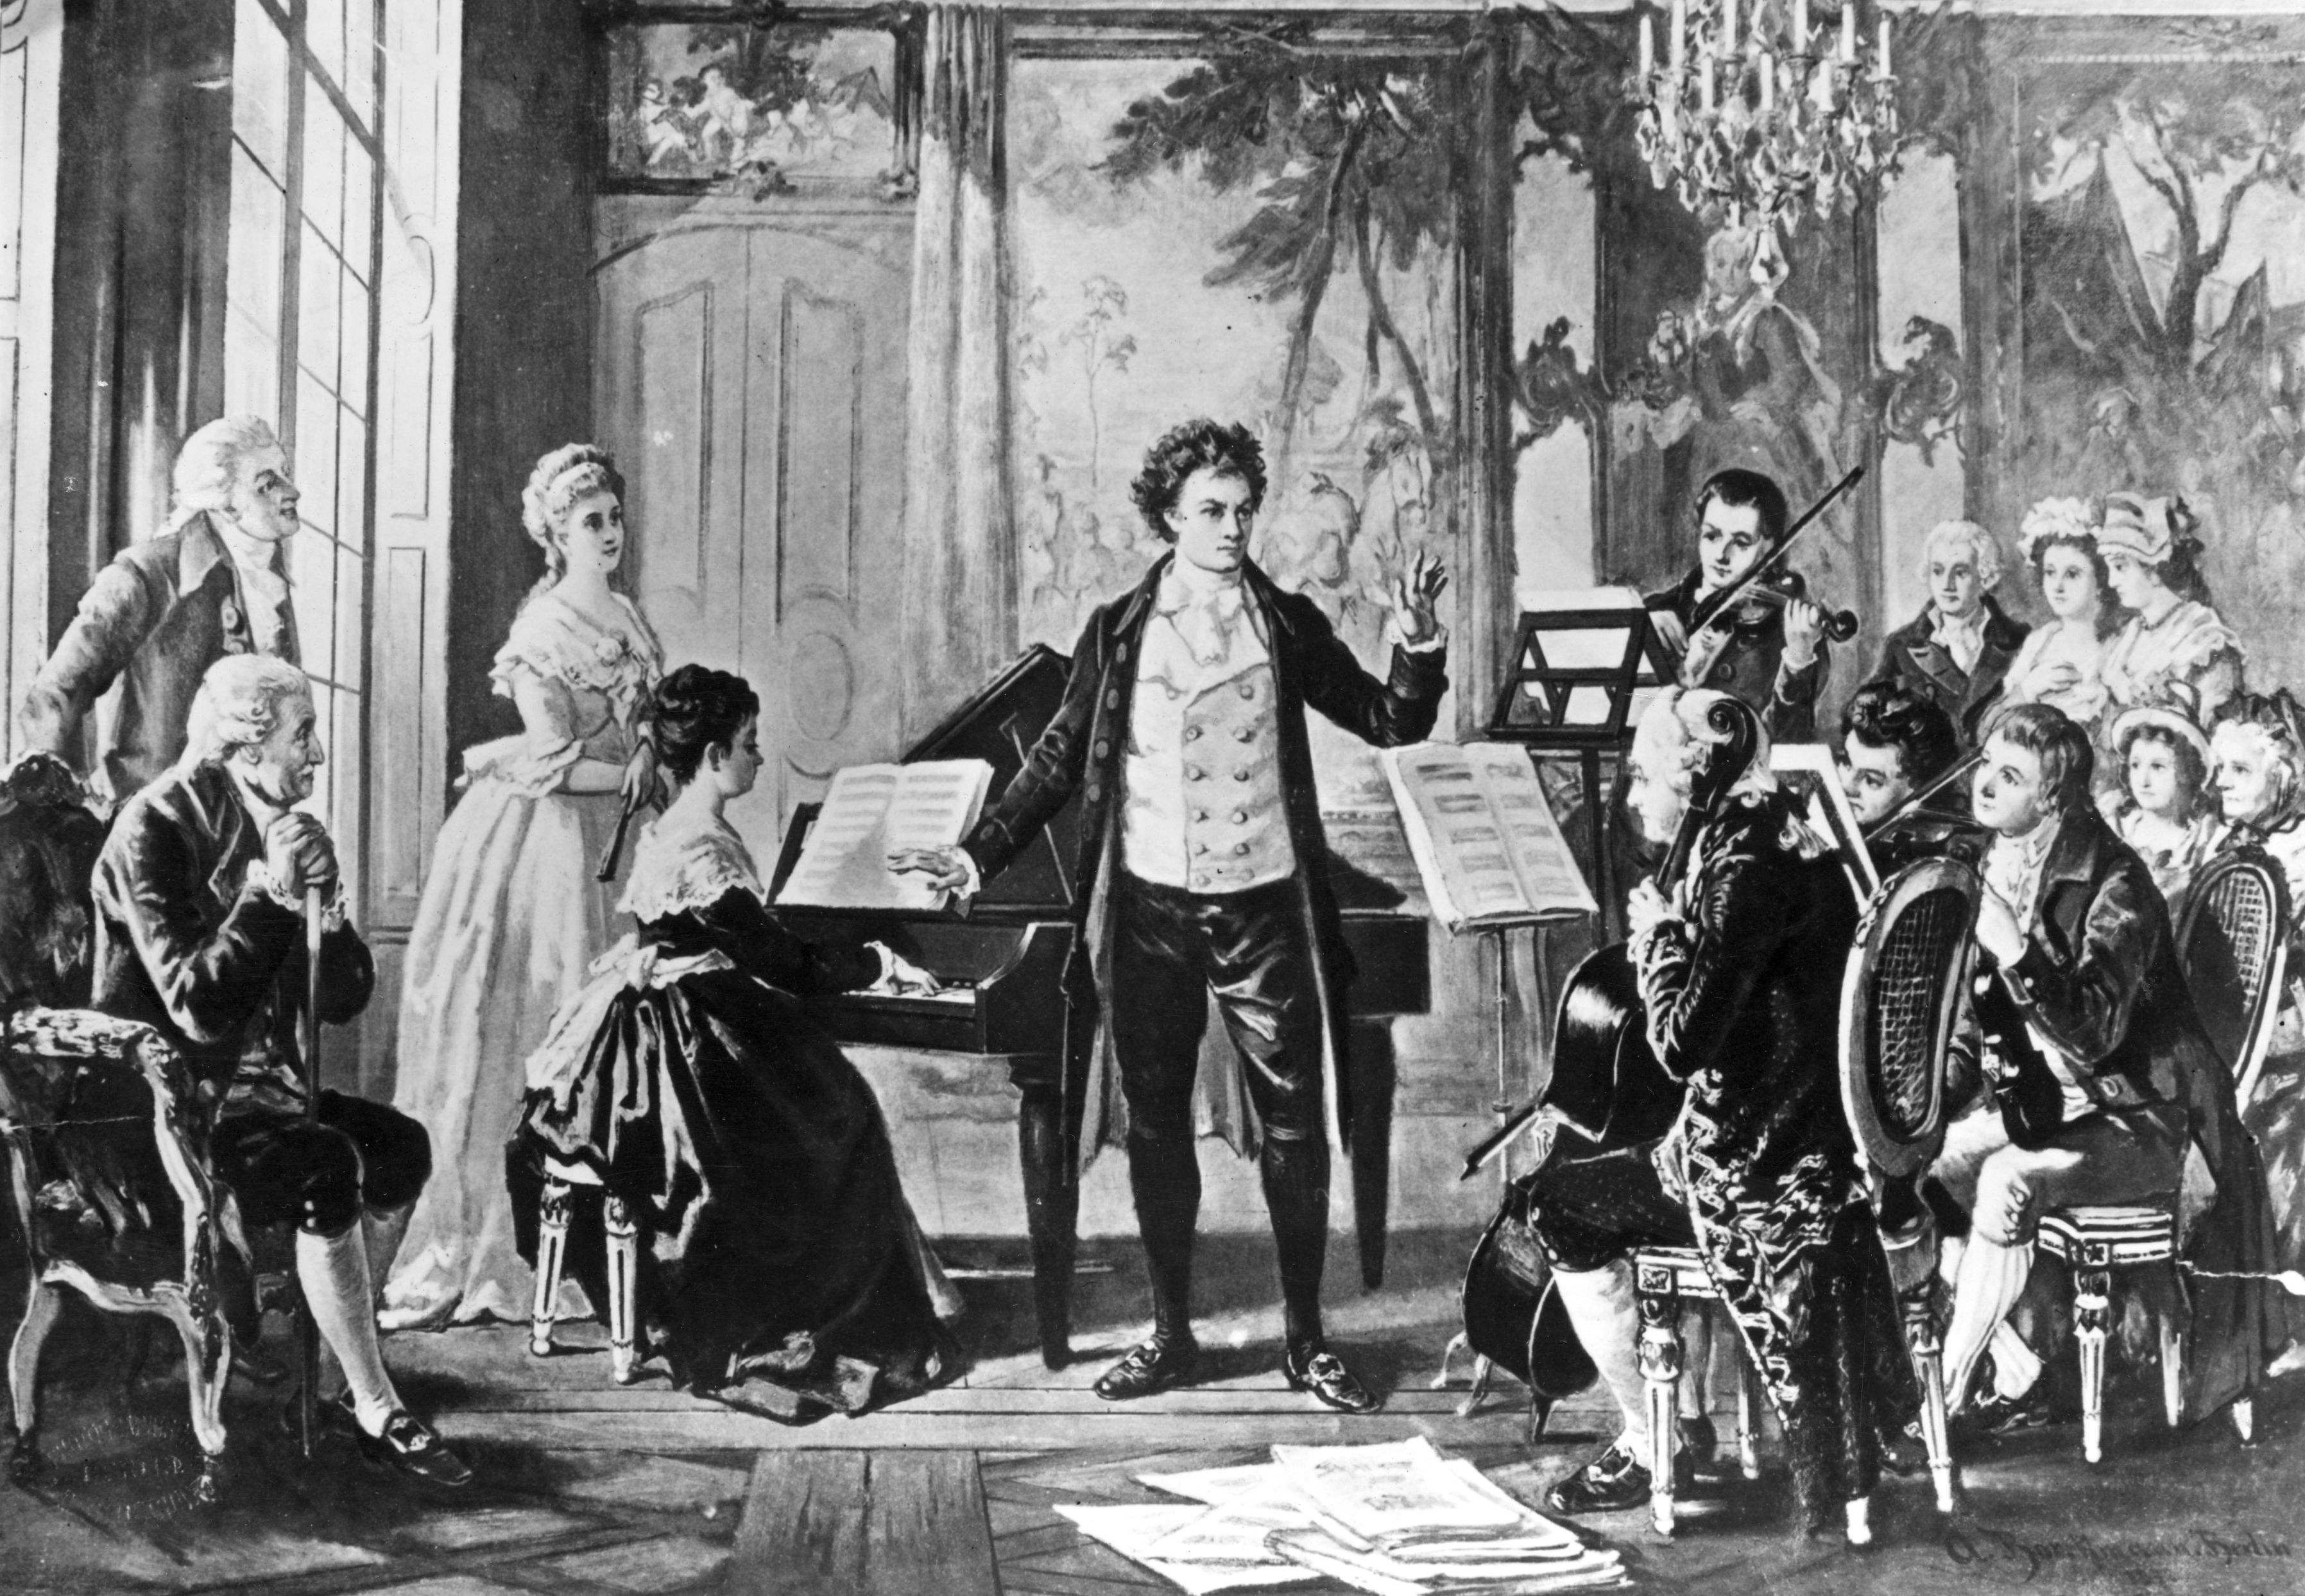 Original Beethoven Score to Be Returned to Rightful Heirs